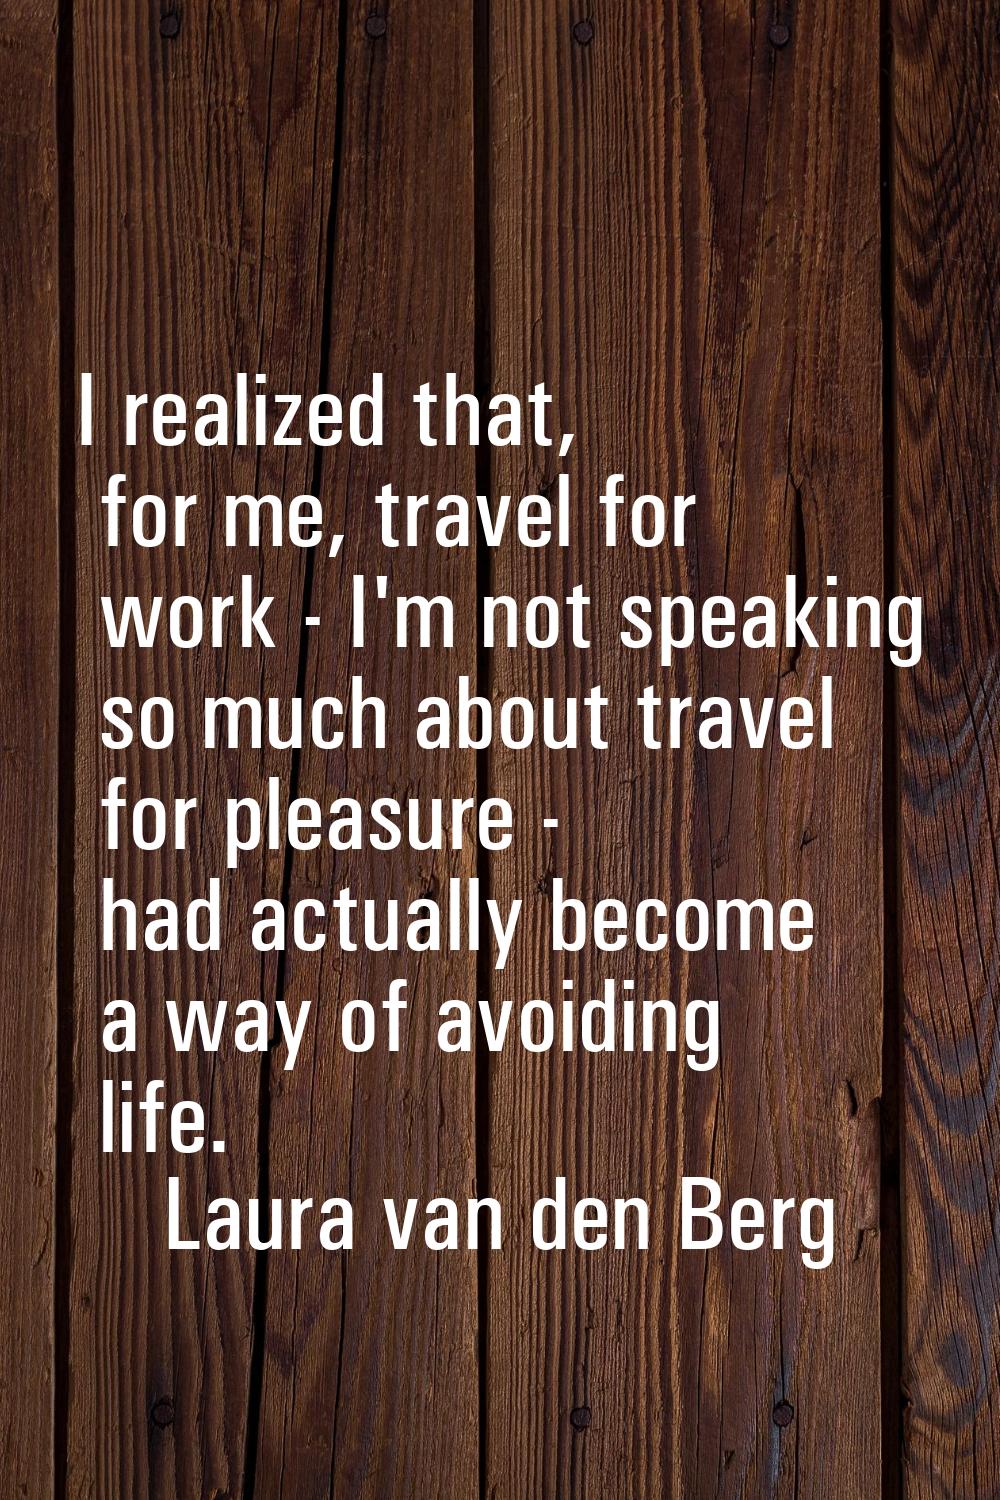 I realized that, for me, travel for work - I'm not speaking so much about travel for pleasure - had